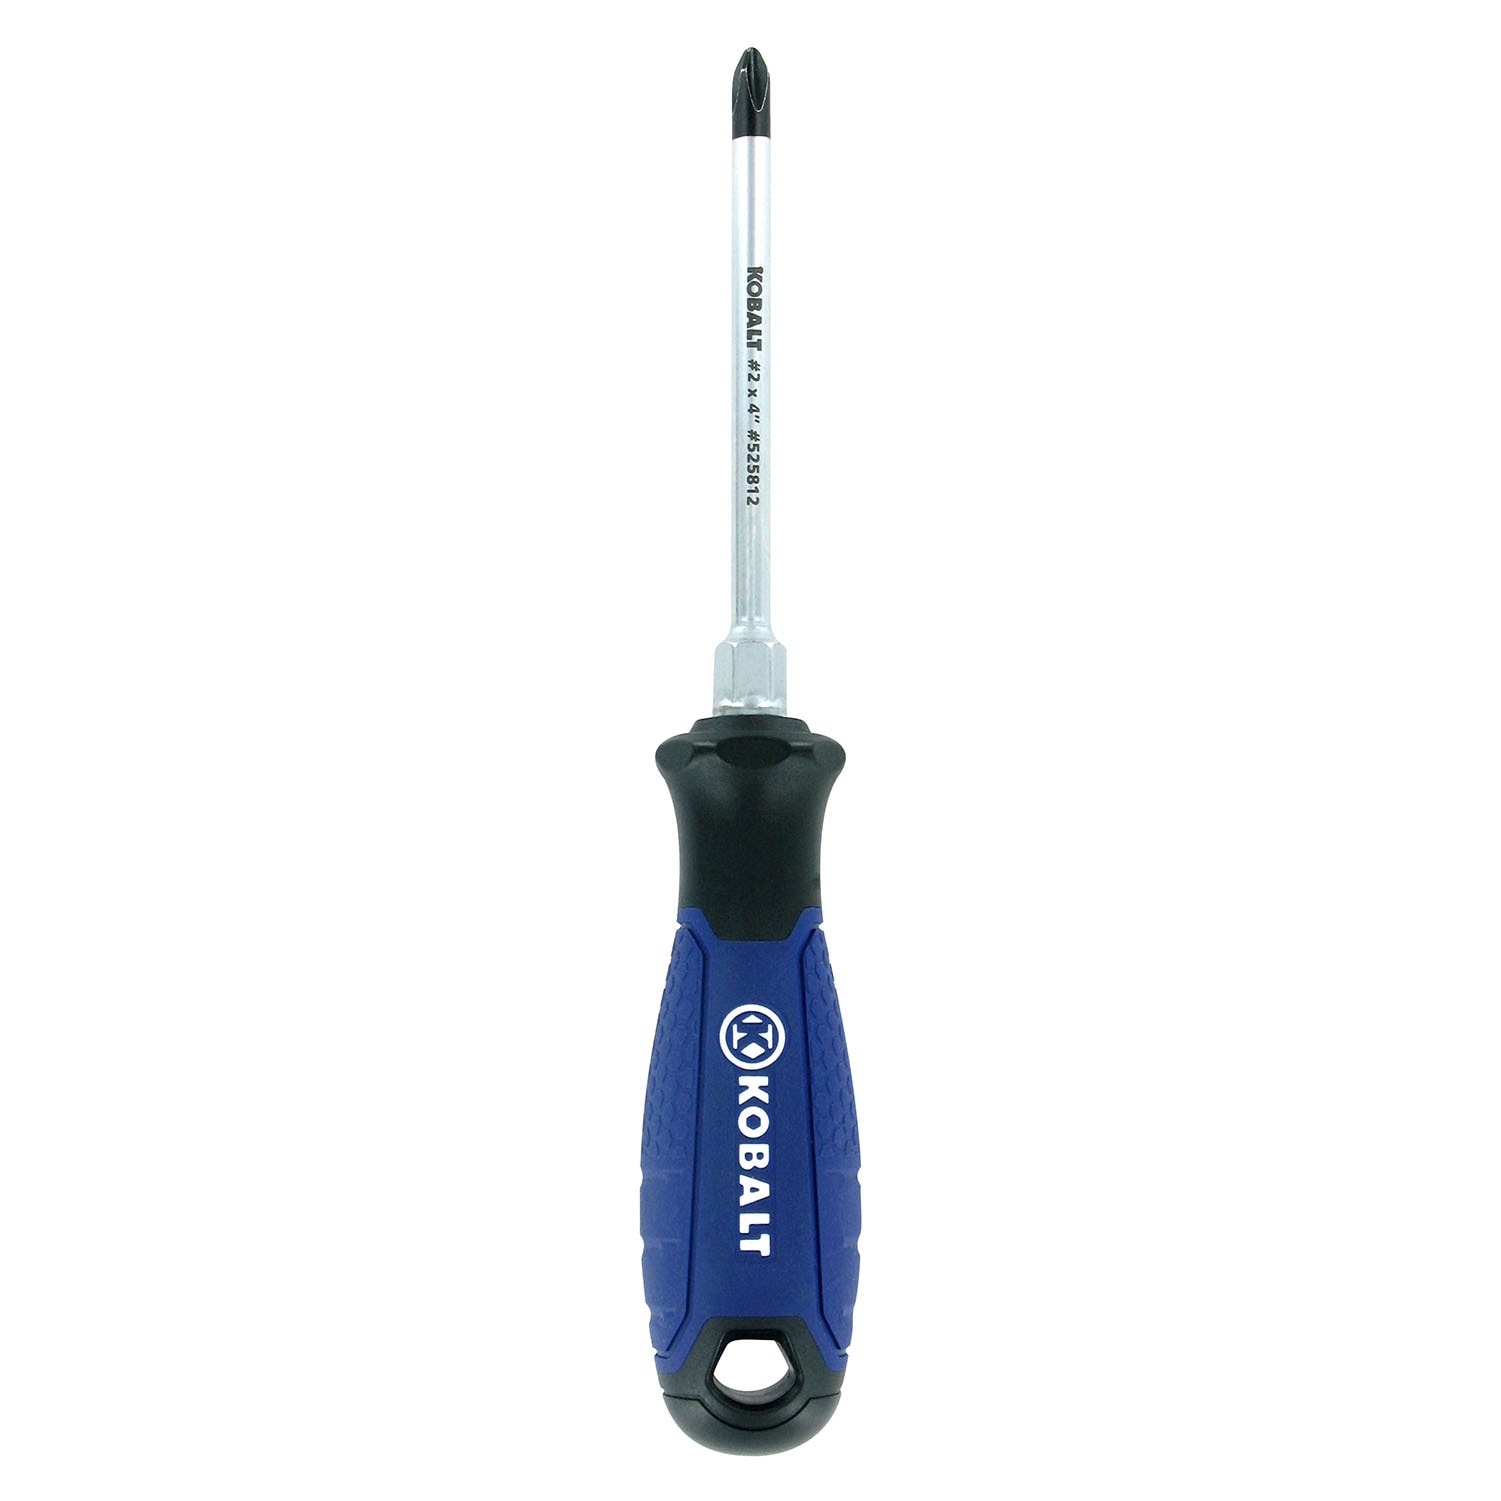 Kobalt #2 Magnetic Phillips Screwdriver in the Screwdrivers at Lowes.com